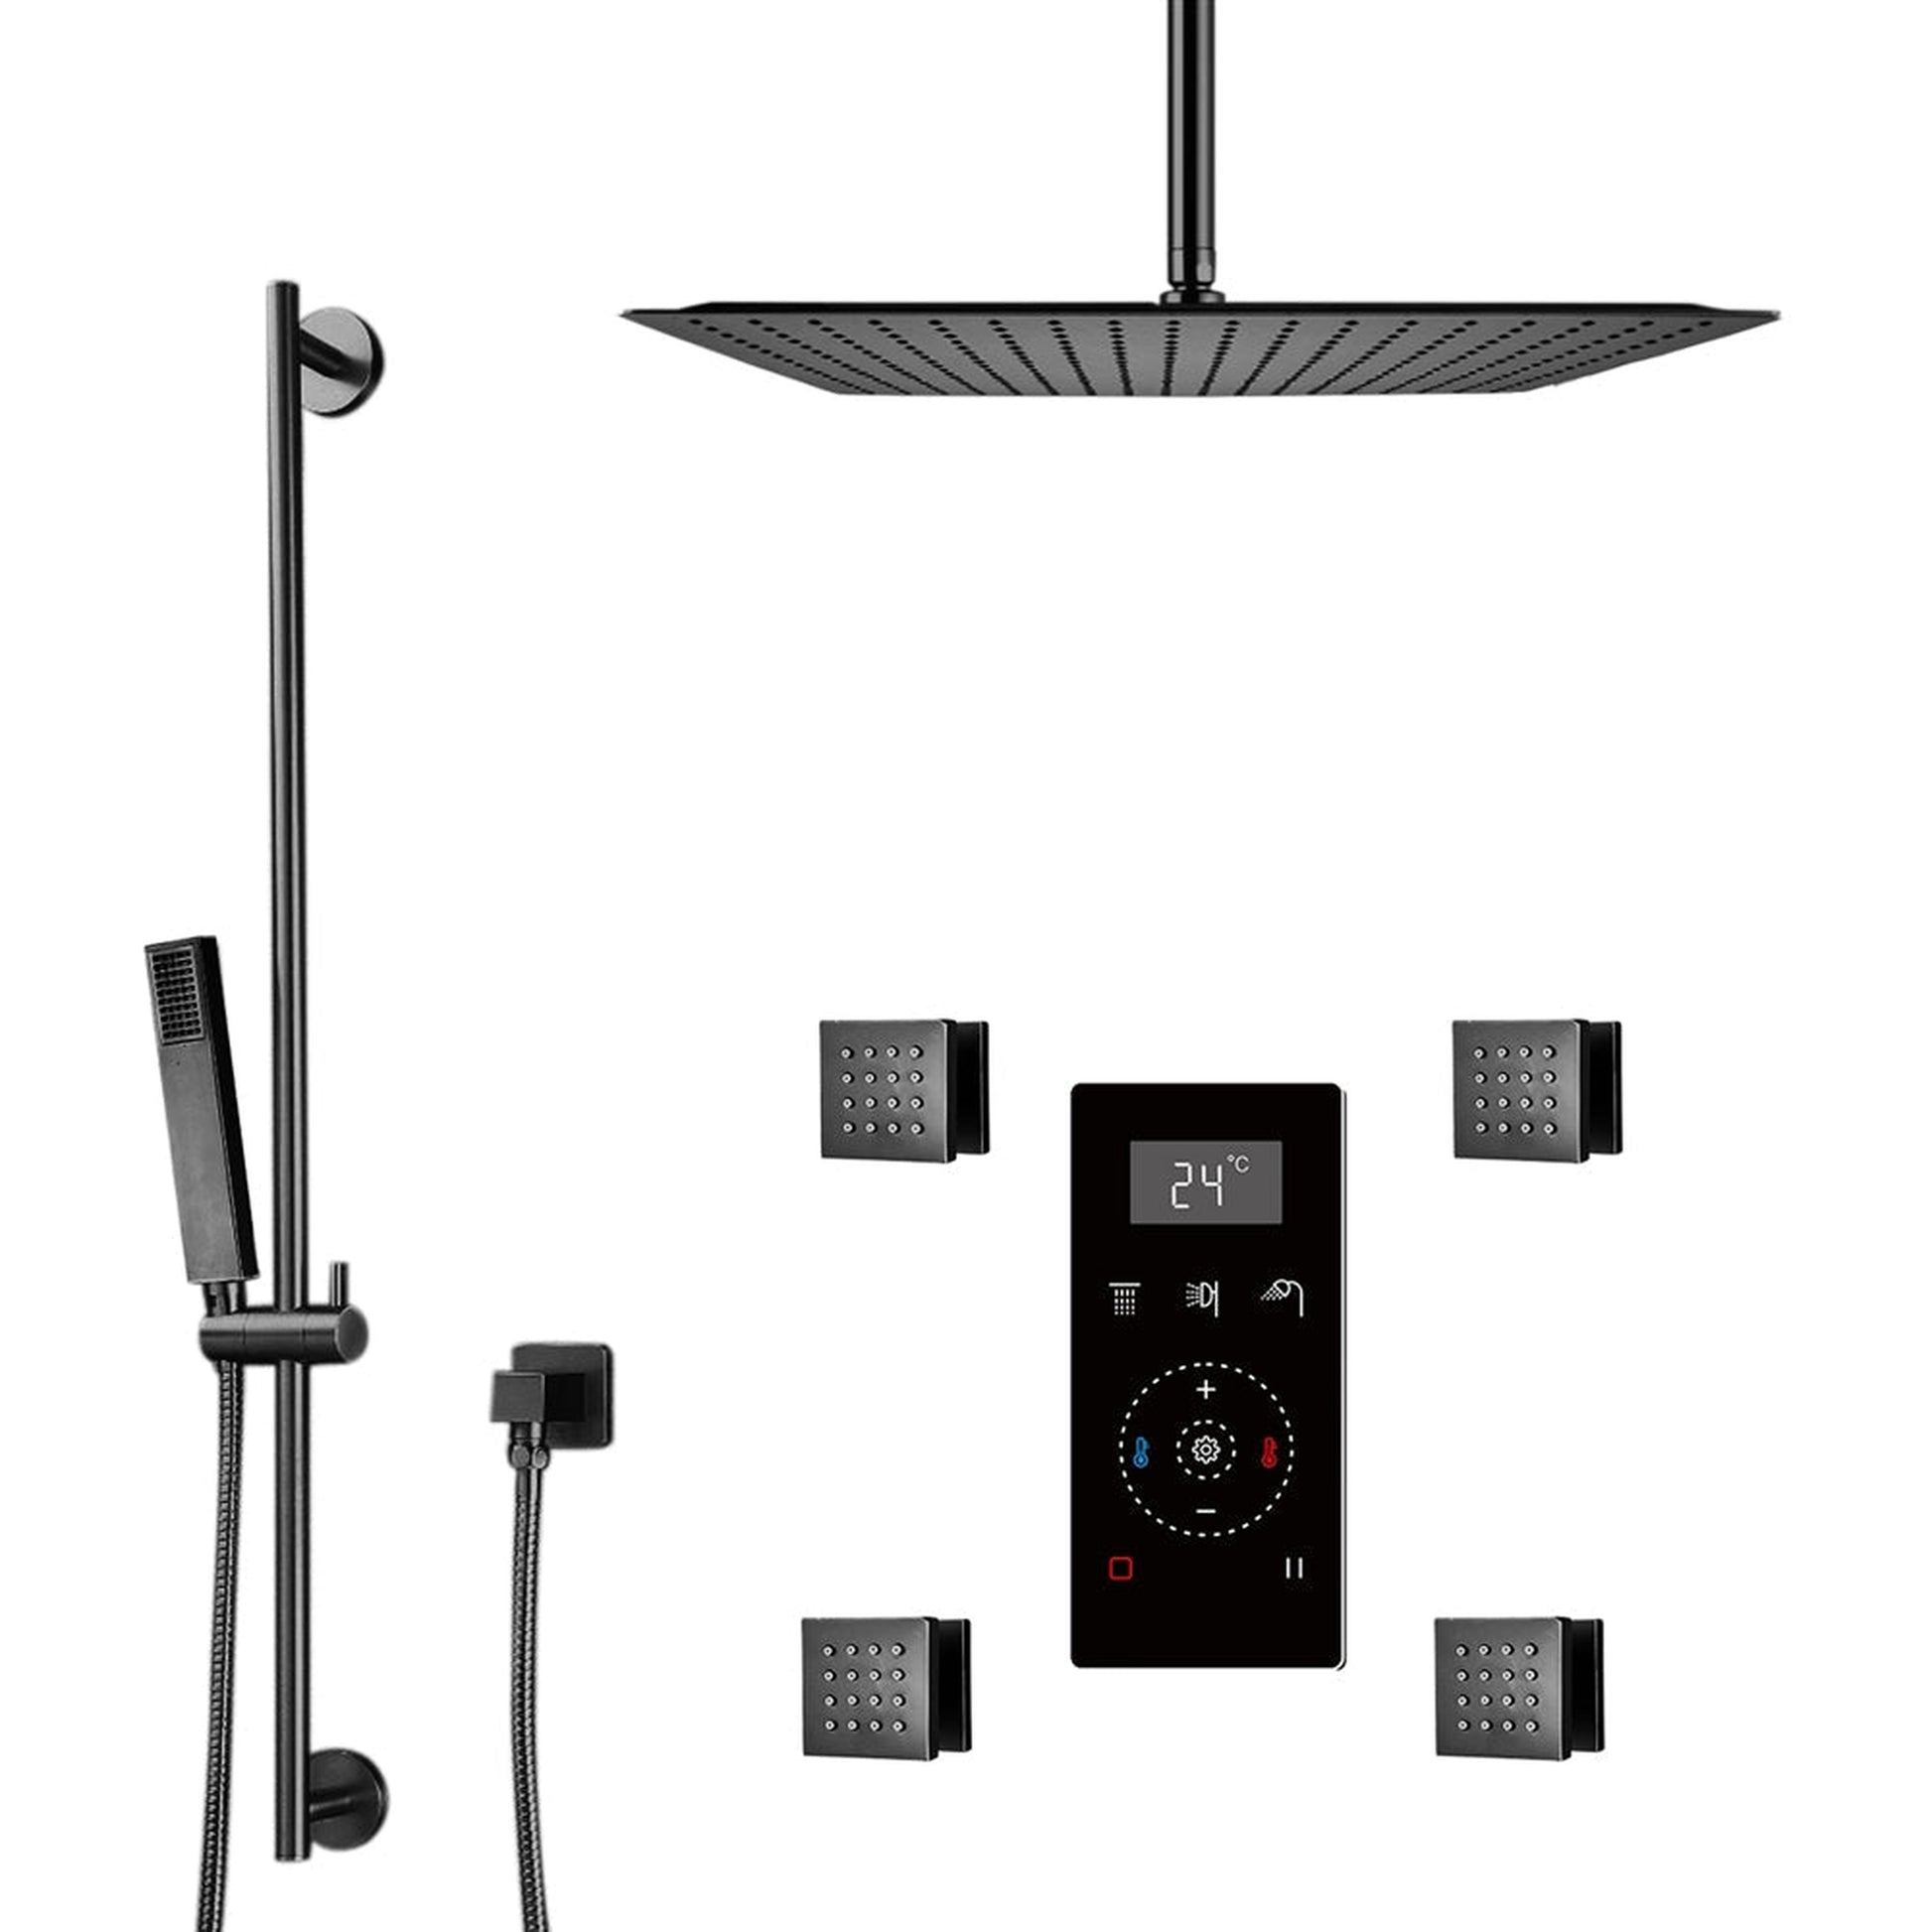 Fontana 10" Matte Black Ceiling Mounted Thermostatic Massage Shower Digital Touch Screen Shower Mixer Display 3-Function Rainfall Shower System With Hand Shower and 4-Jet Body Sprays